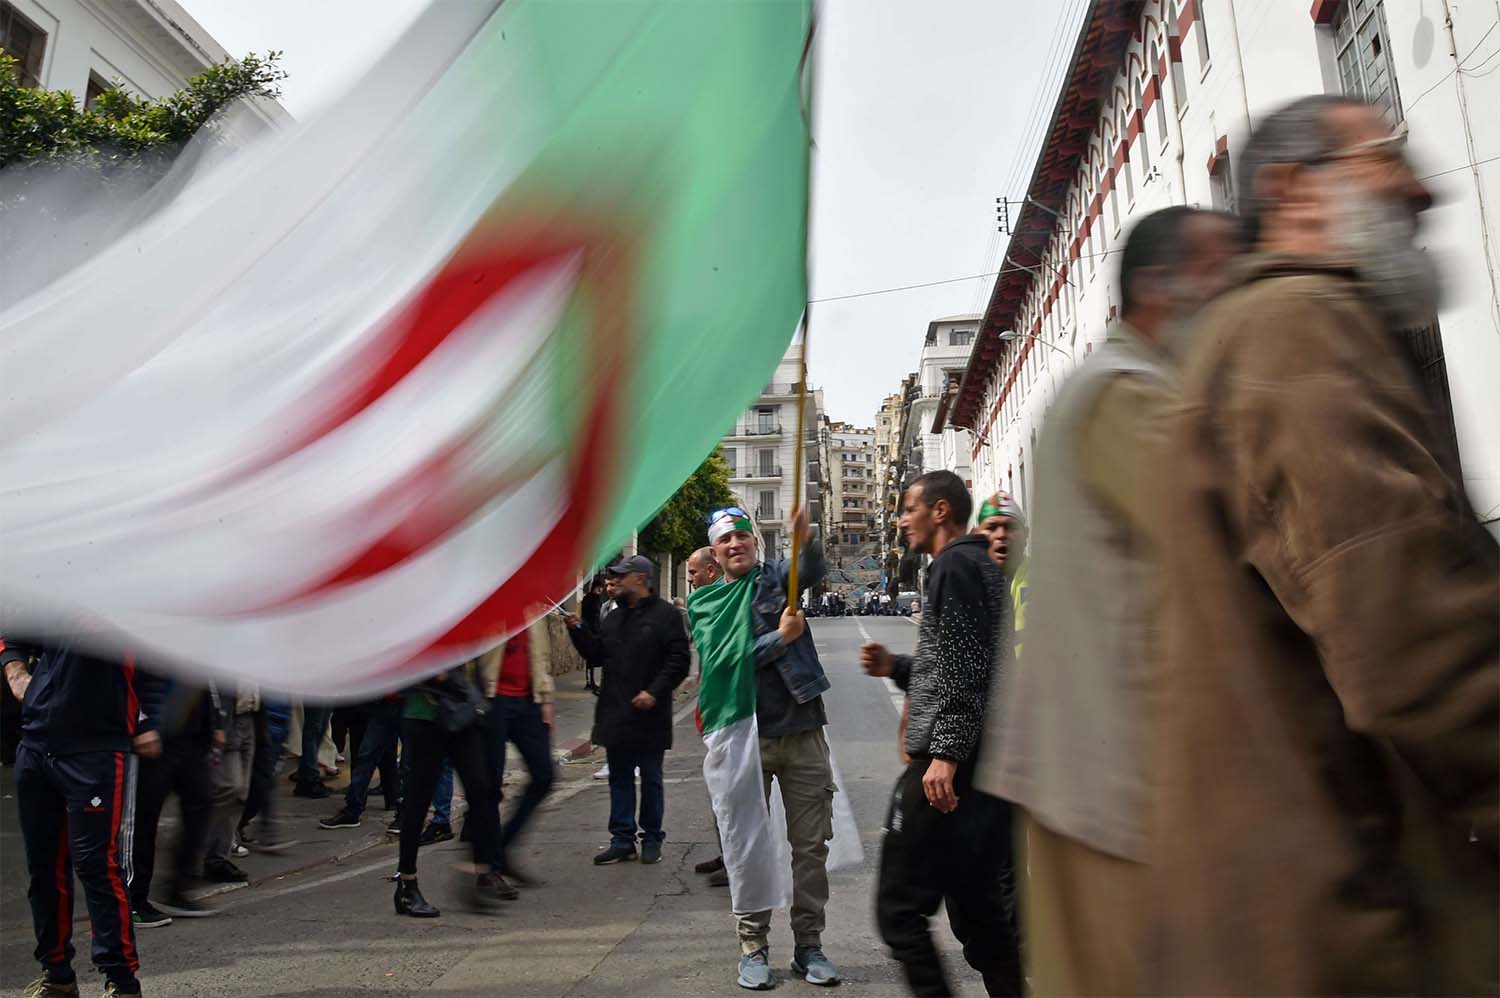 An Algerian protester waves the national flag during a weekly anti-government demonstration in Algiers on March 13